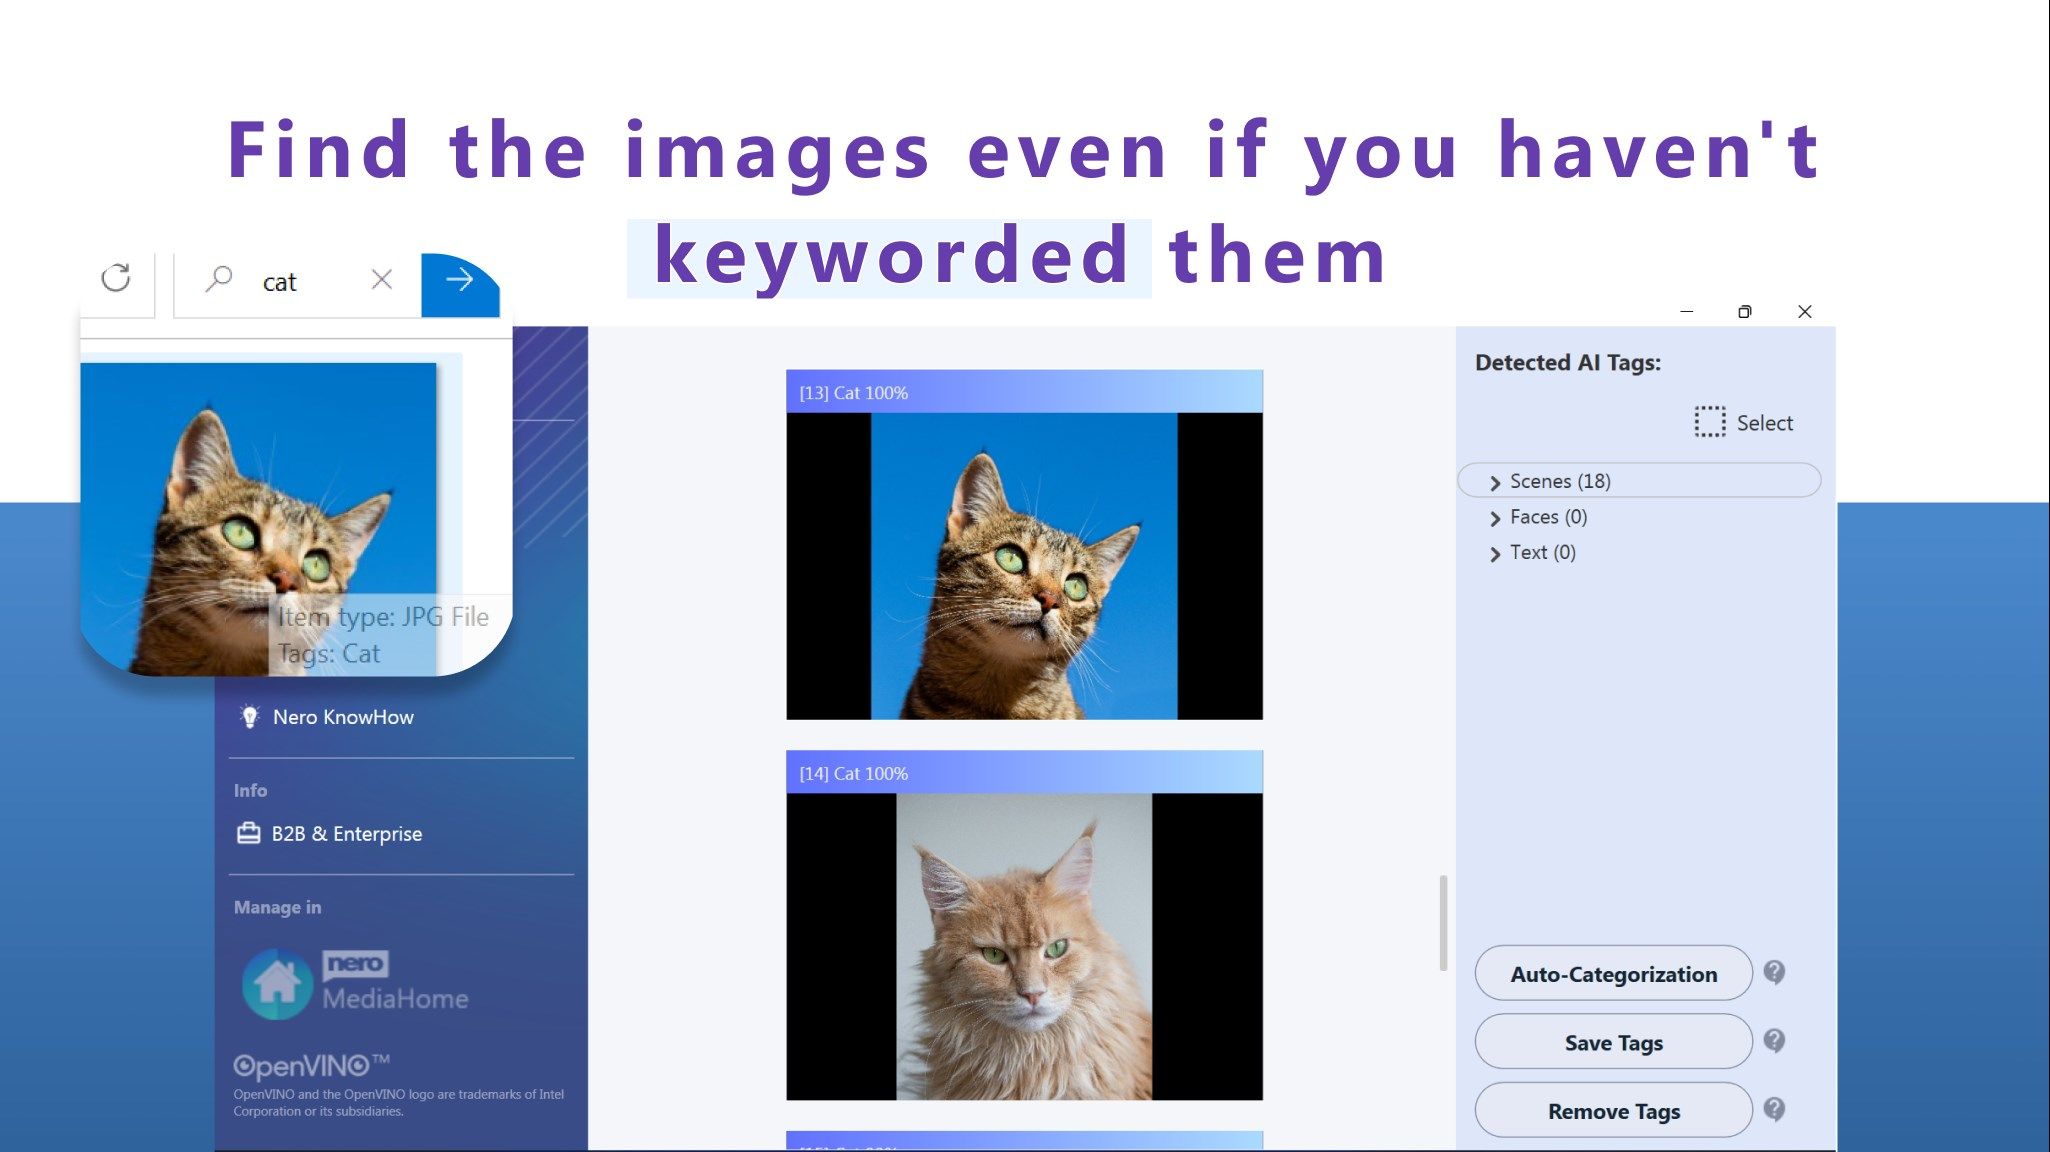 Find the images even if you haven't keyworded them